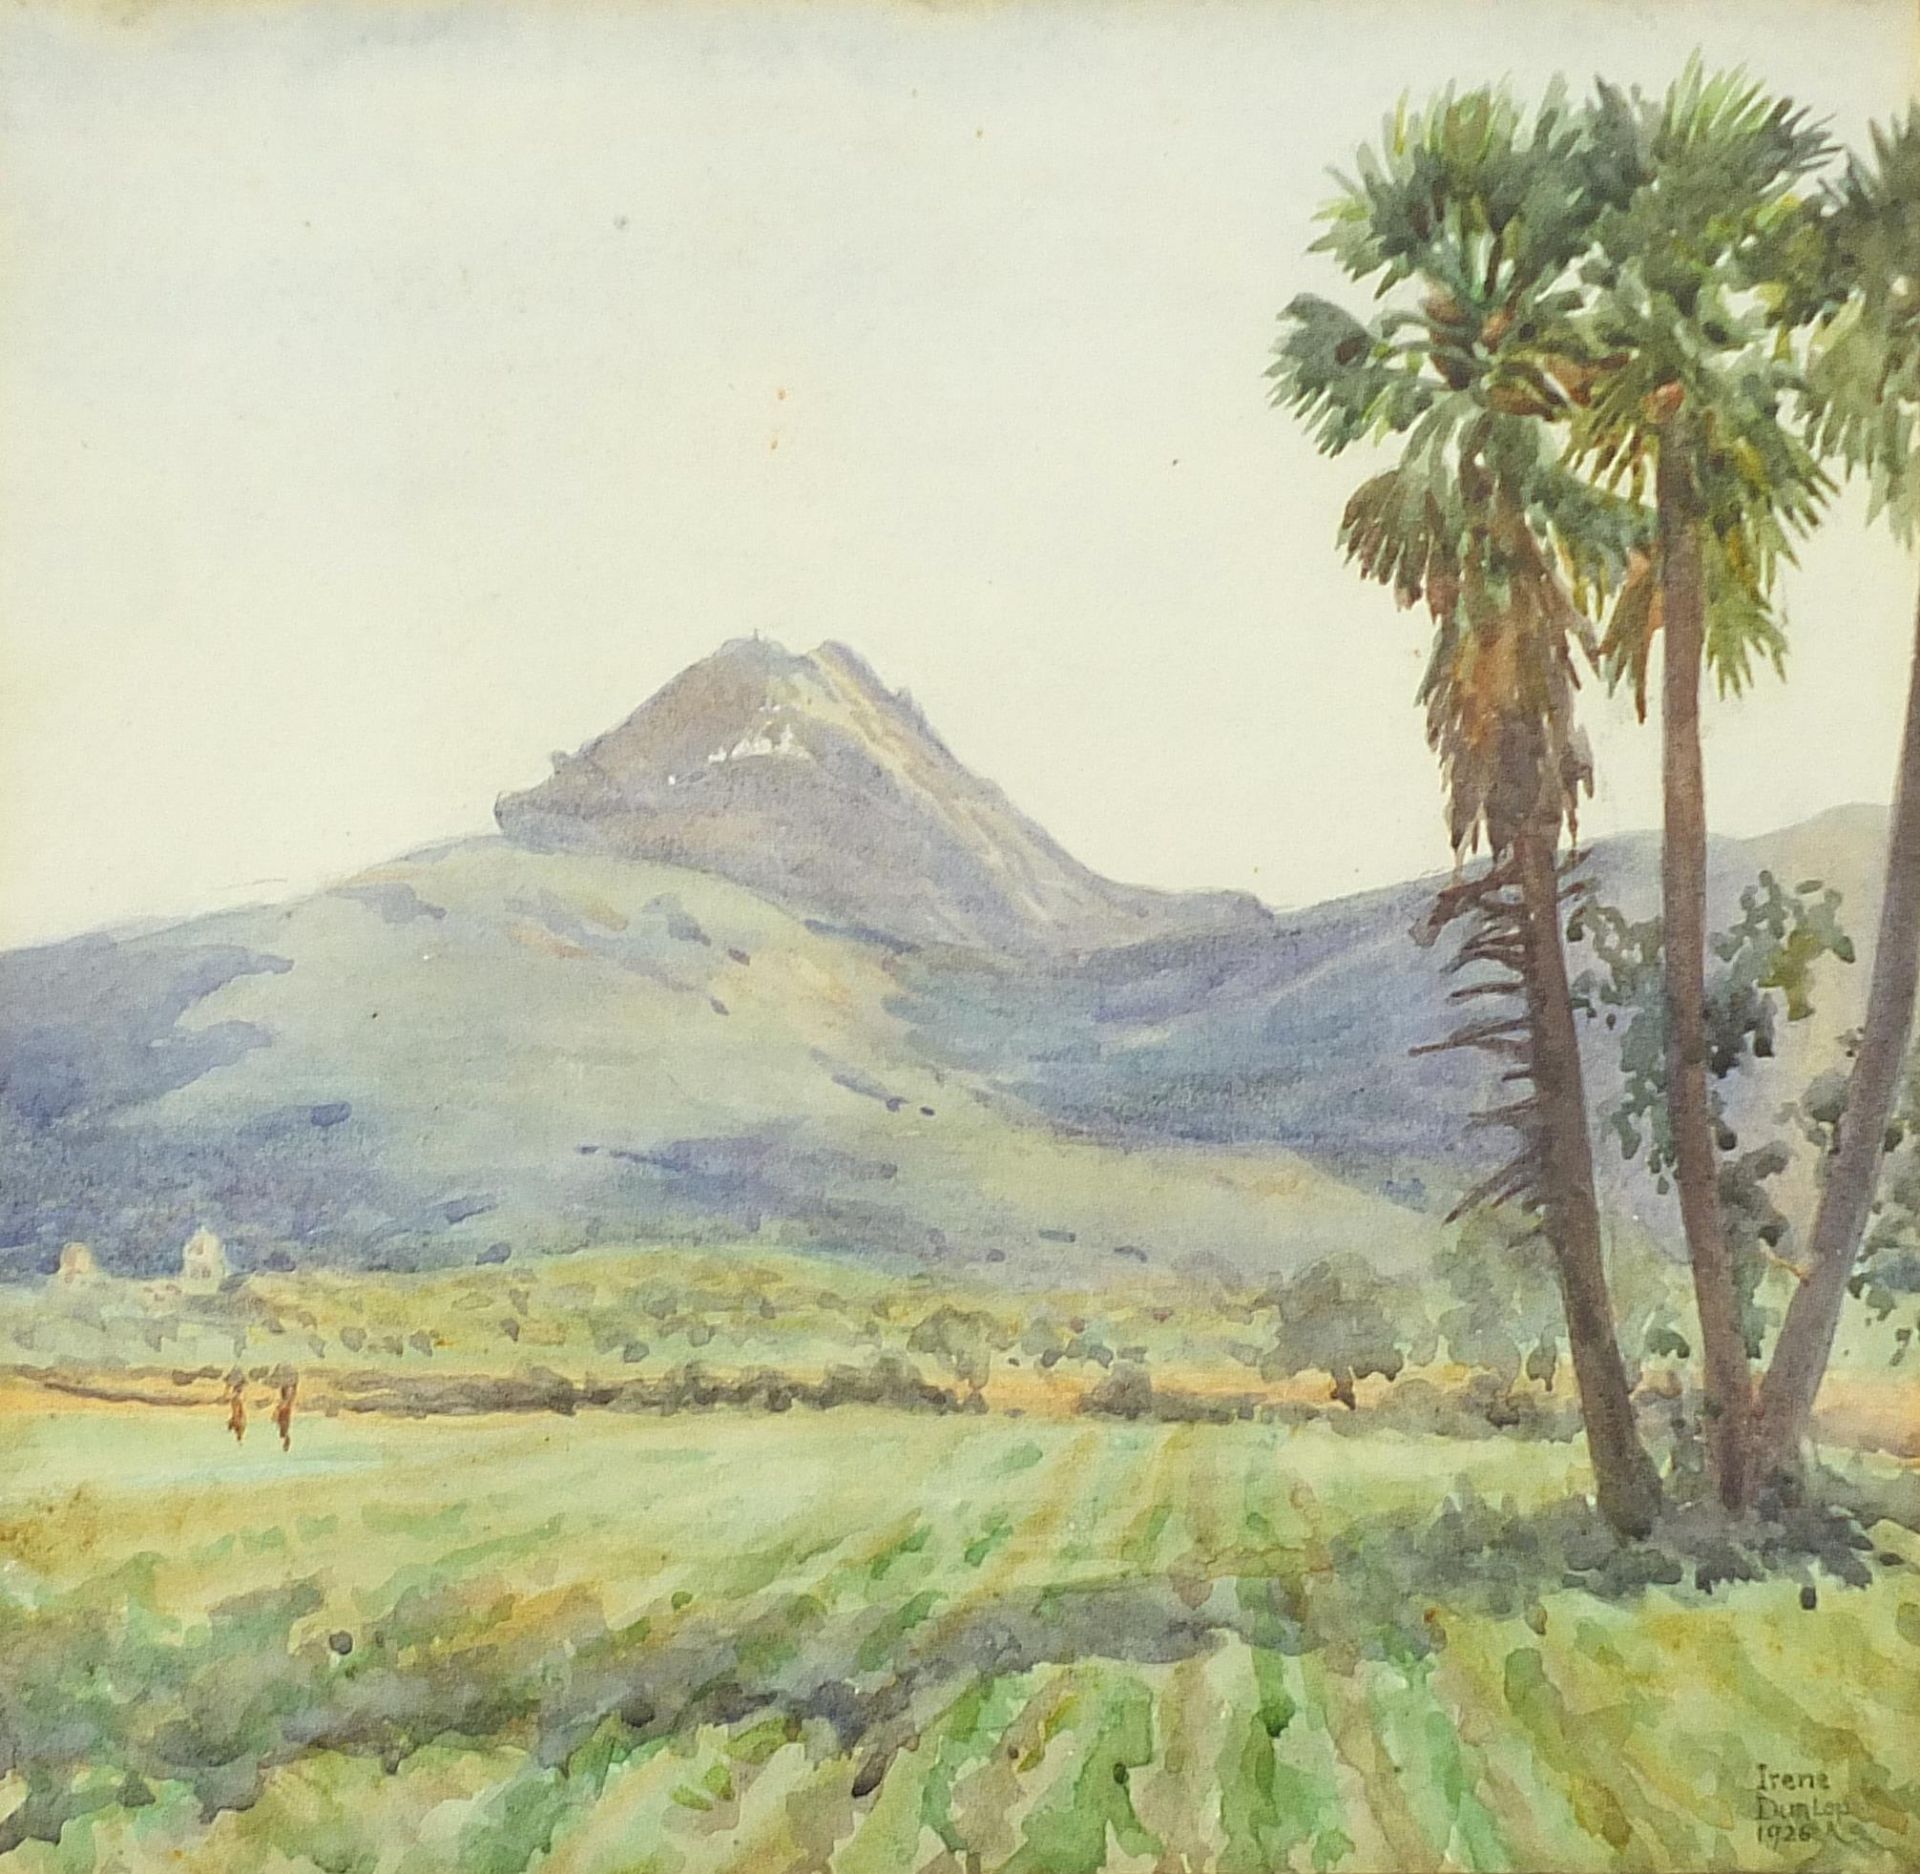 Irene Dunlop 1926 - In the Shadow of Cape Town Mountain, South African school signed watercolour,